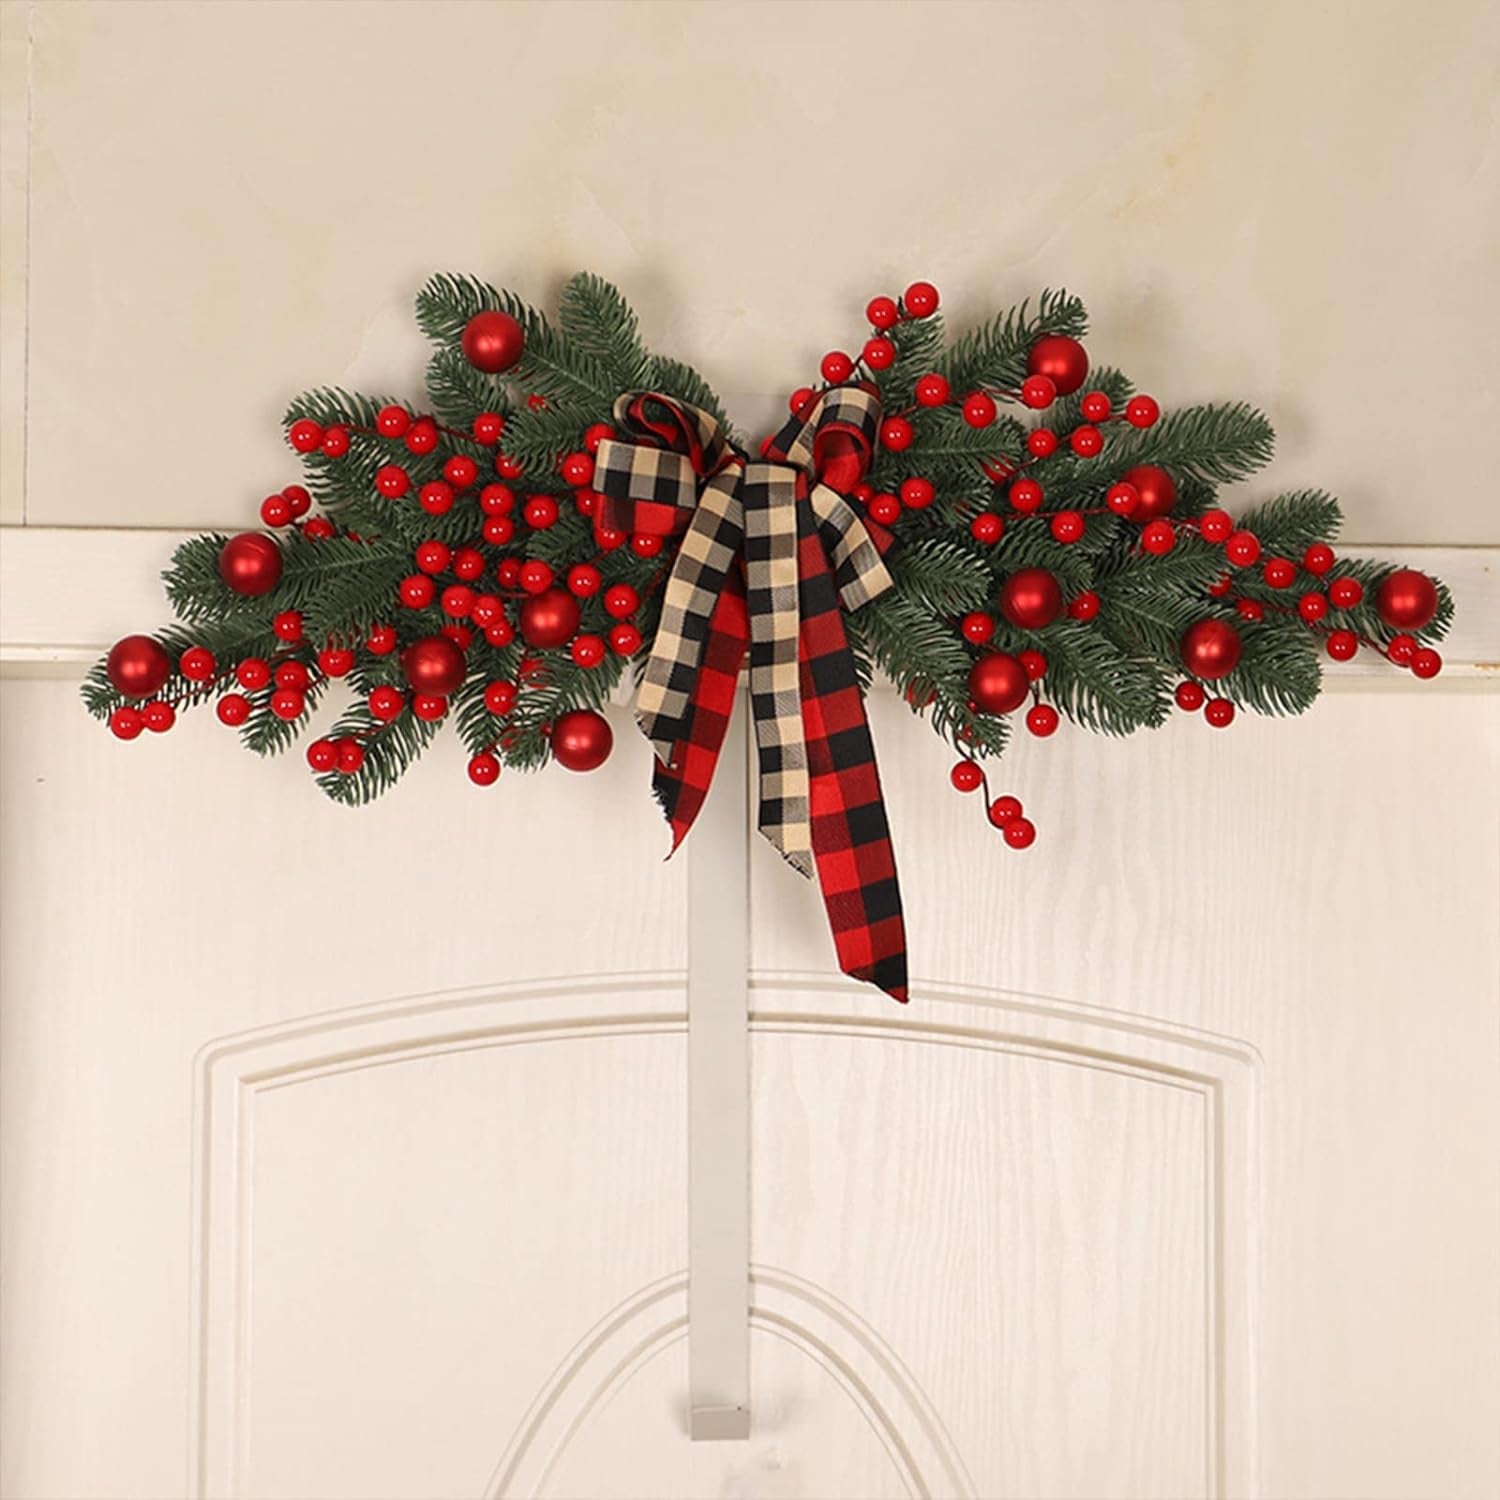 Artificial Christmas Swag Wreaths,27.6 Inch Christmas Pine Needles Door Swag with Plaid Ribbon Bow and Red Berries Greenery Xmas Mailbox Swag for Front Door Window Mantels Wall Home(Without Light)